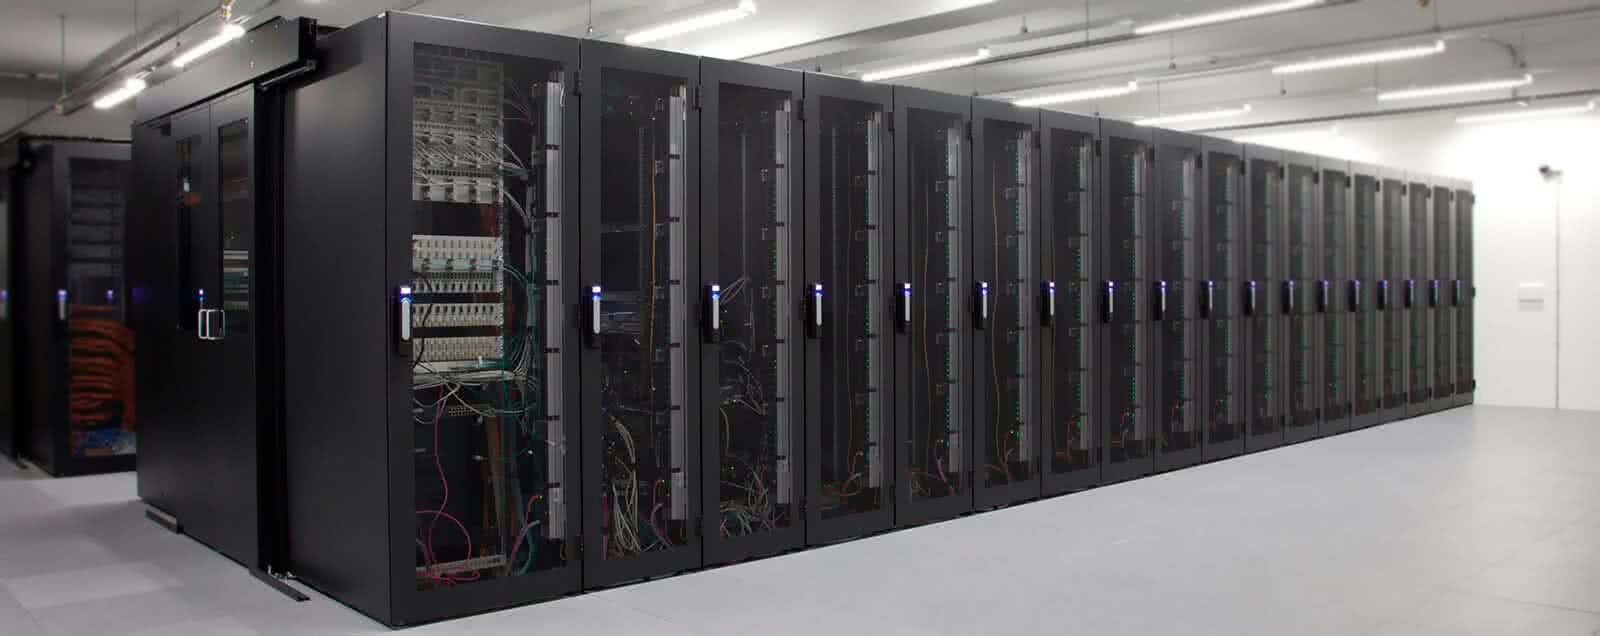 Critical infrastructure and data center support